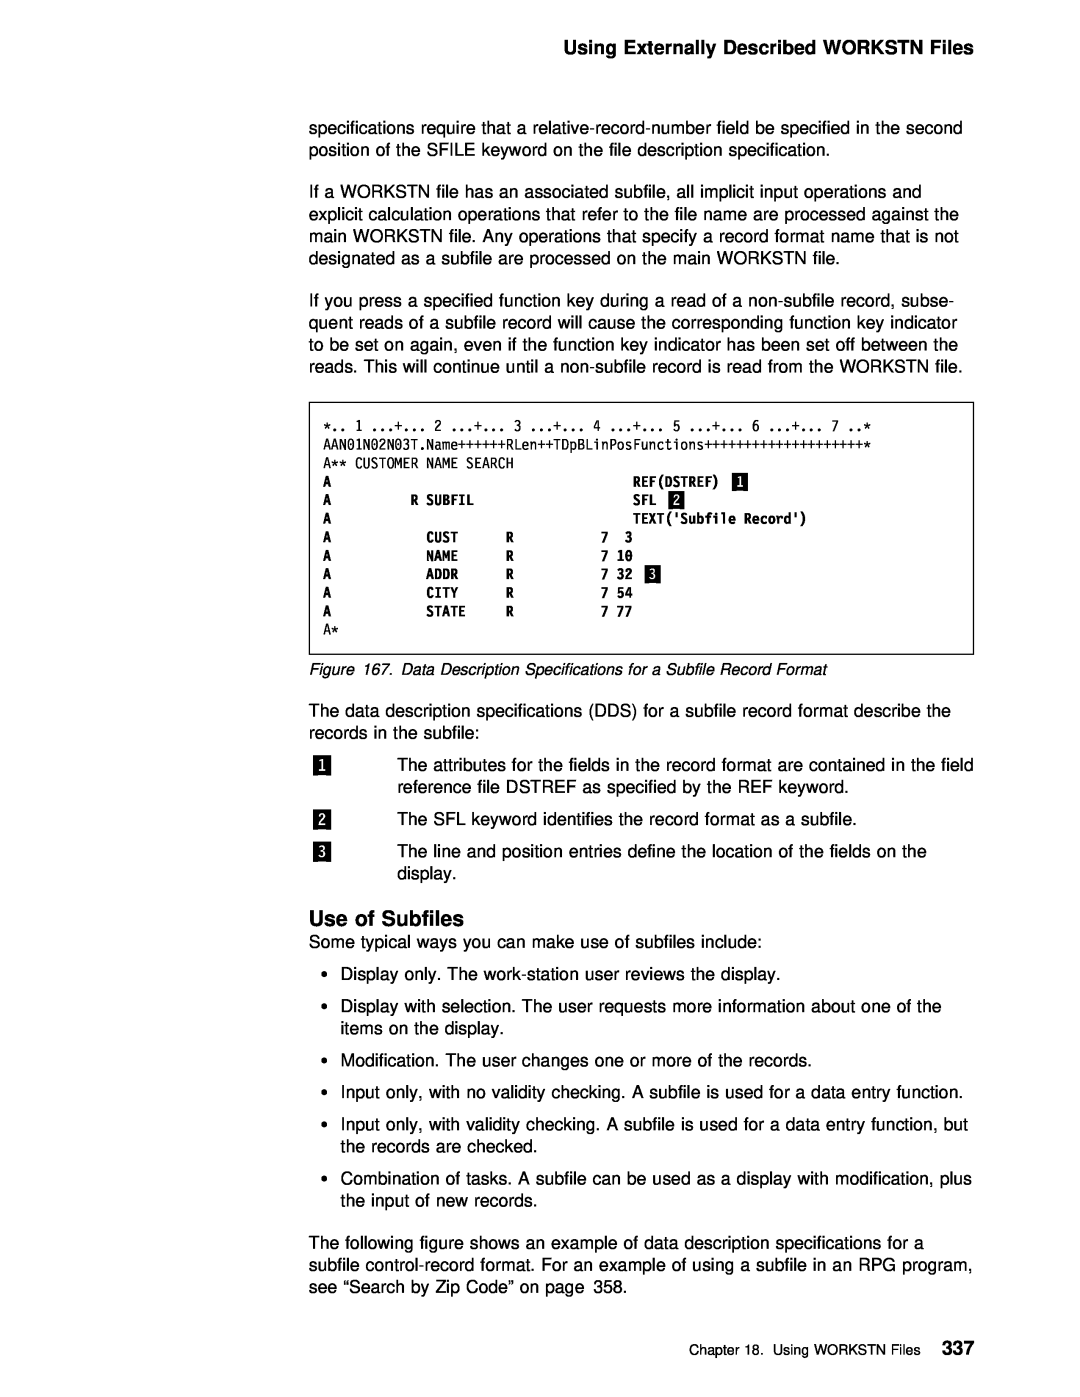 IBM AS/400 manual Use of Subfiles, Using Externally Described WORKSTN Files 